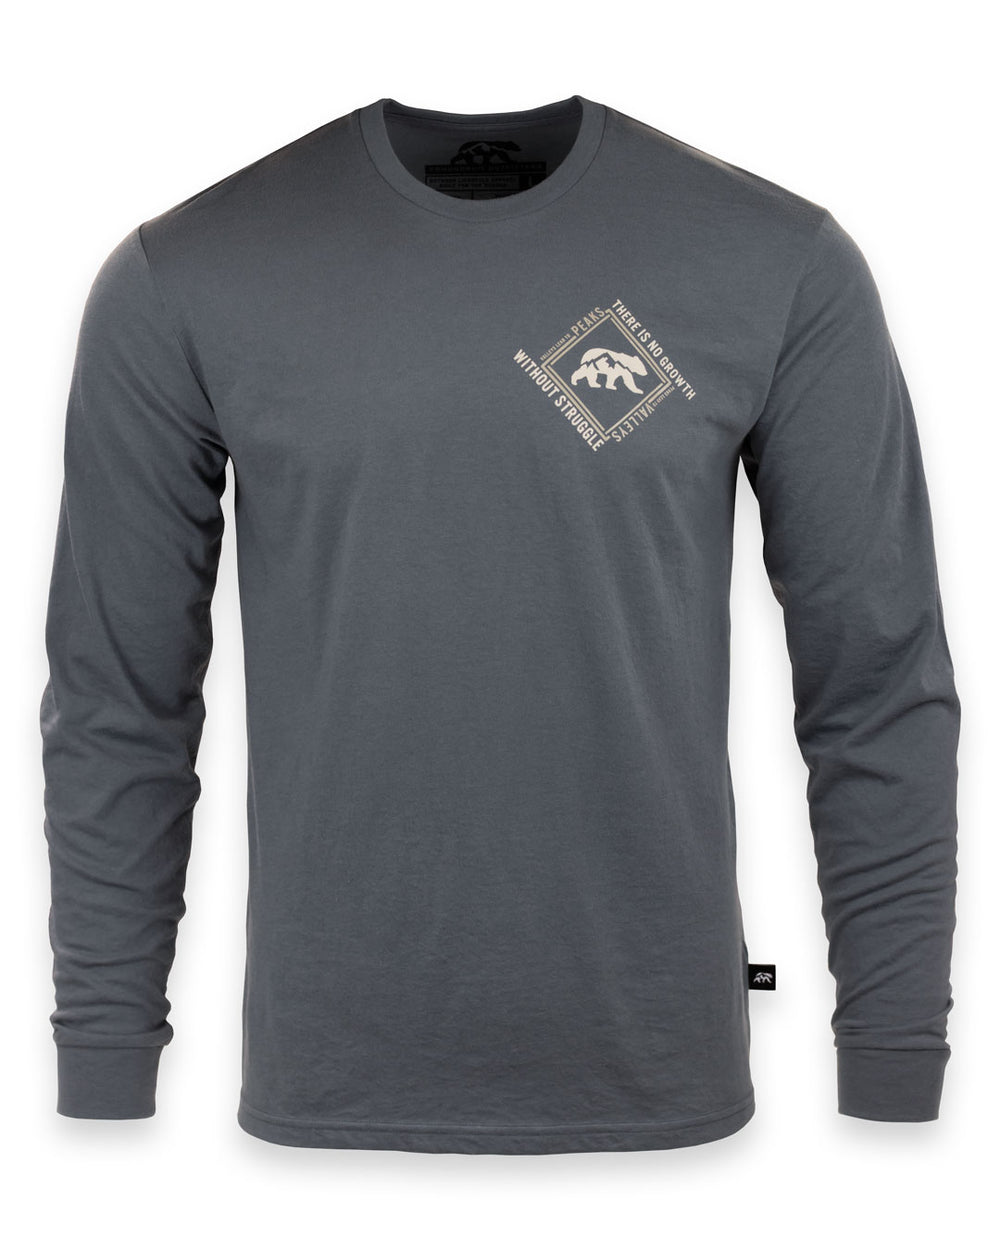 LONG SLEEVES - Conundrum Outfitters